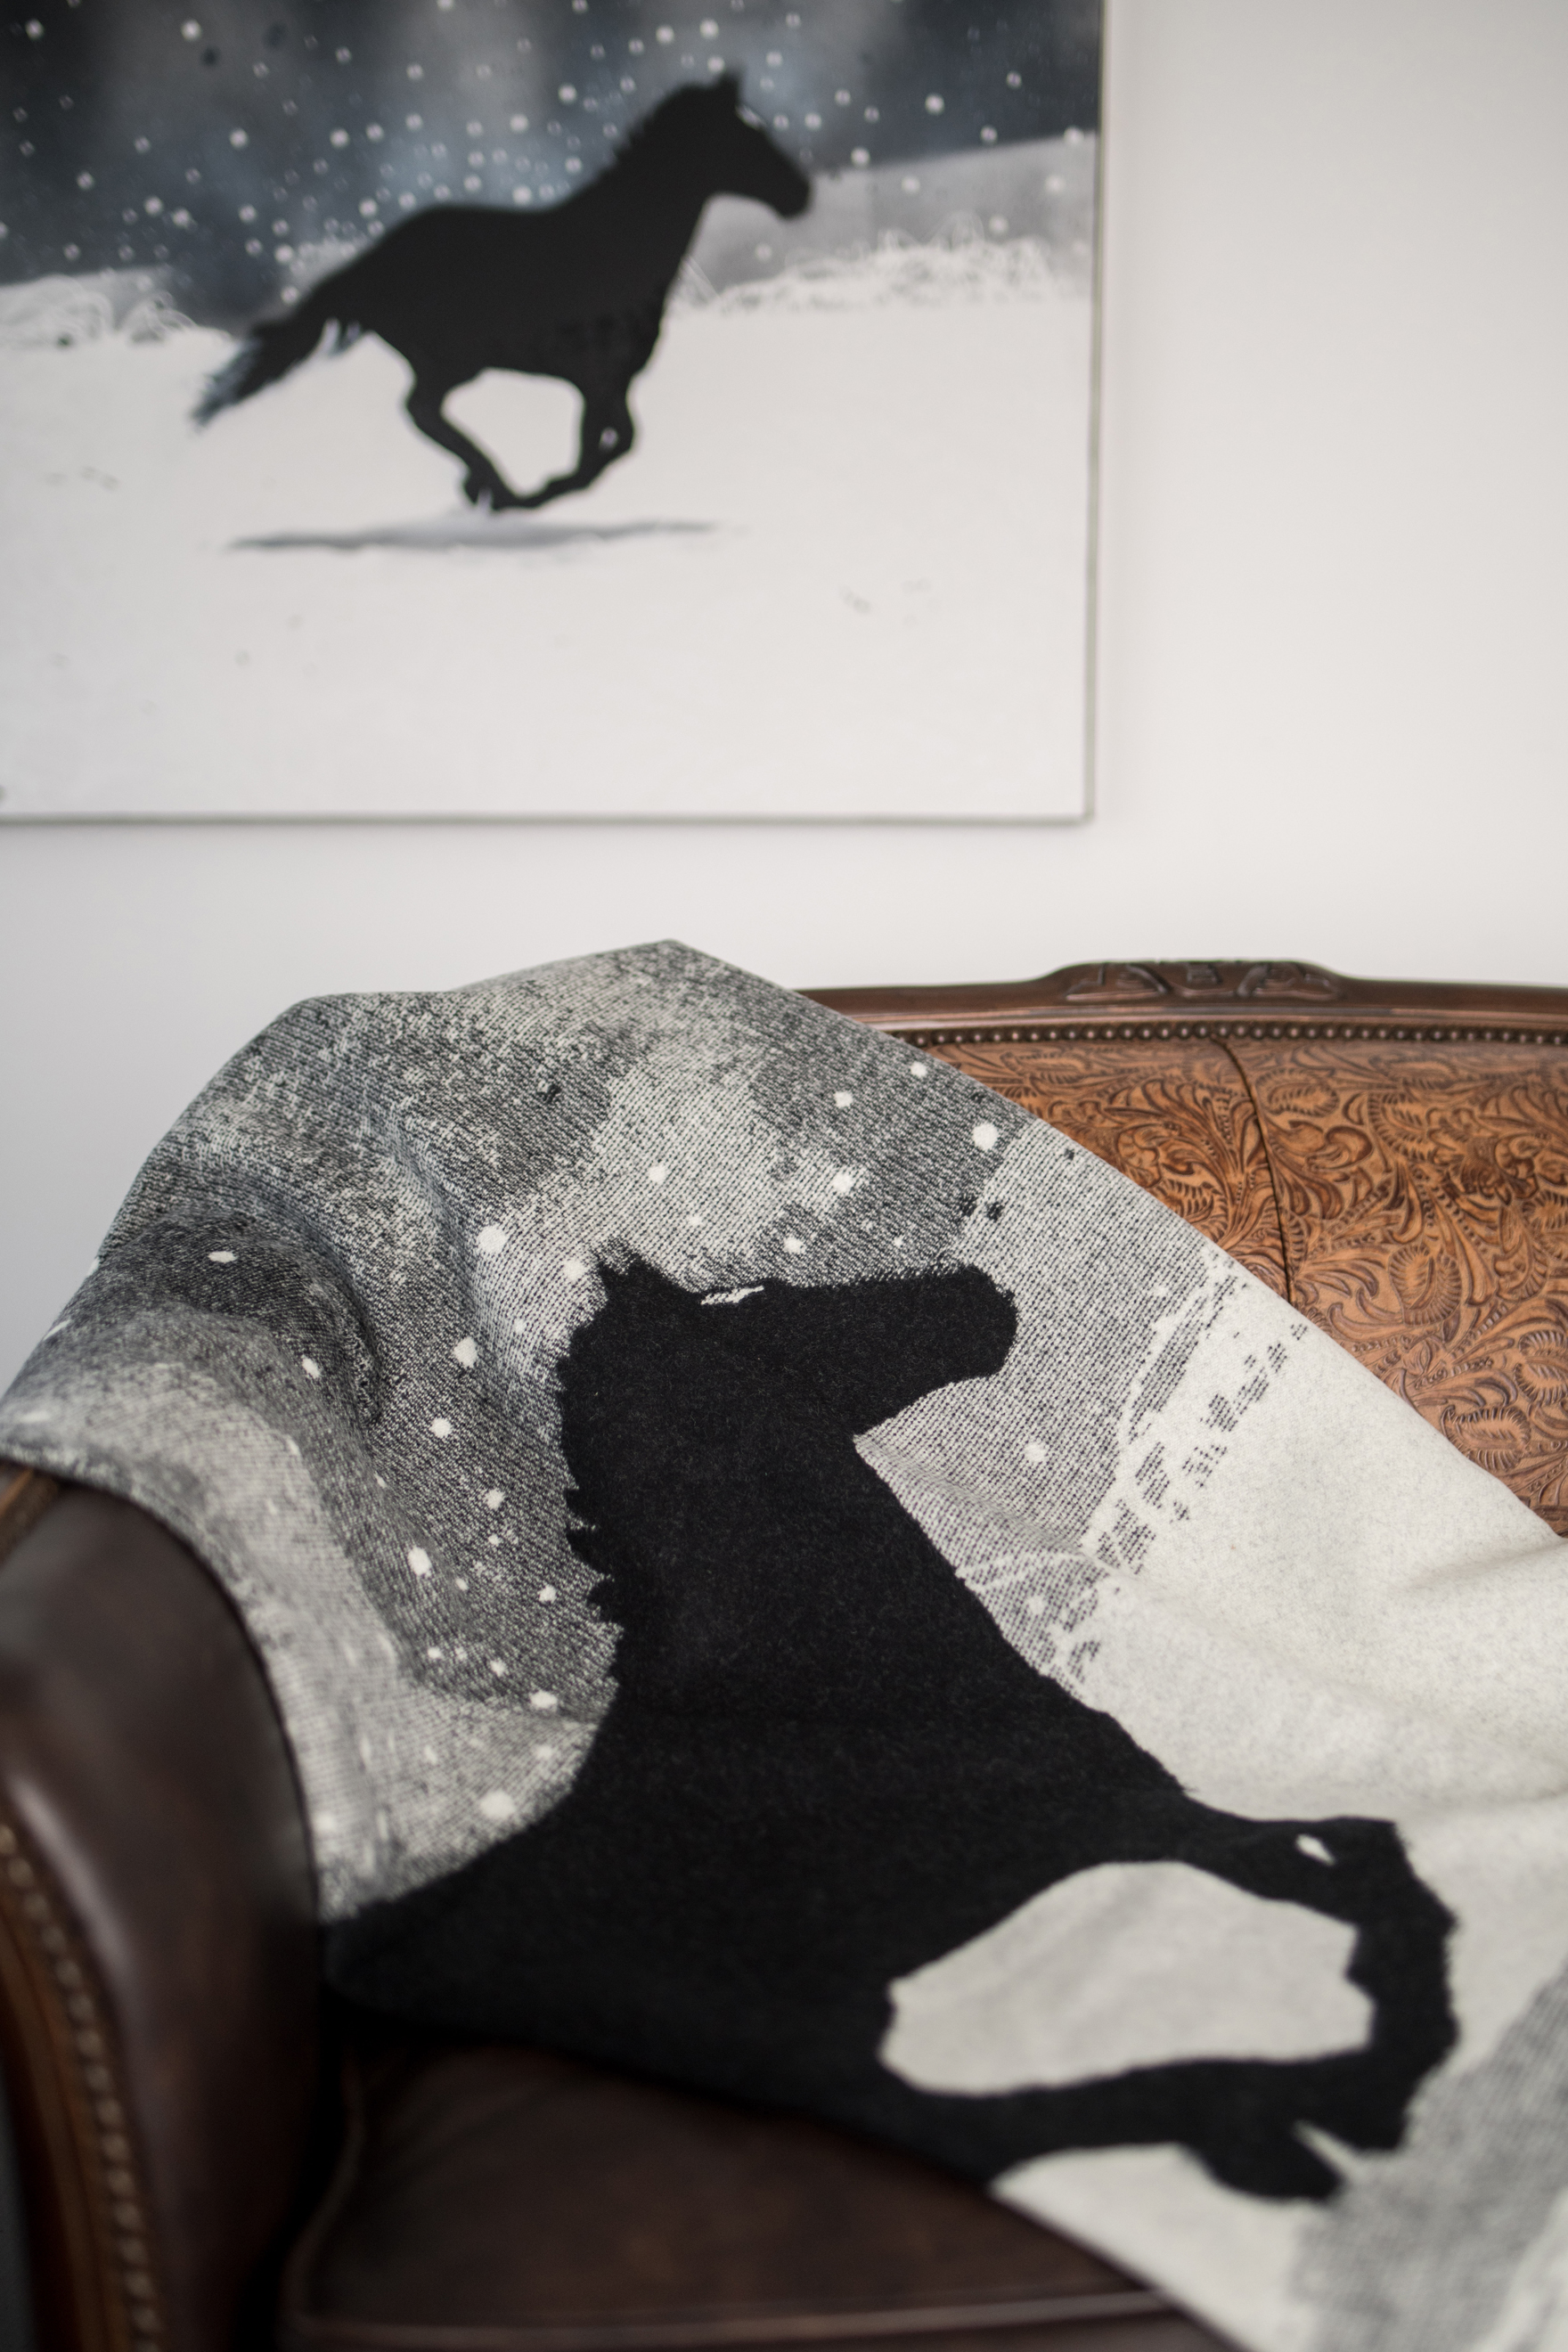 Rendered in black, white and gray virgin wool by Pendleton, the Judd Thompson painting “A Horse Called Paint” is the latest blanket in the historic woolen mill’s Artist Collection.